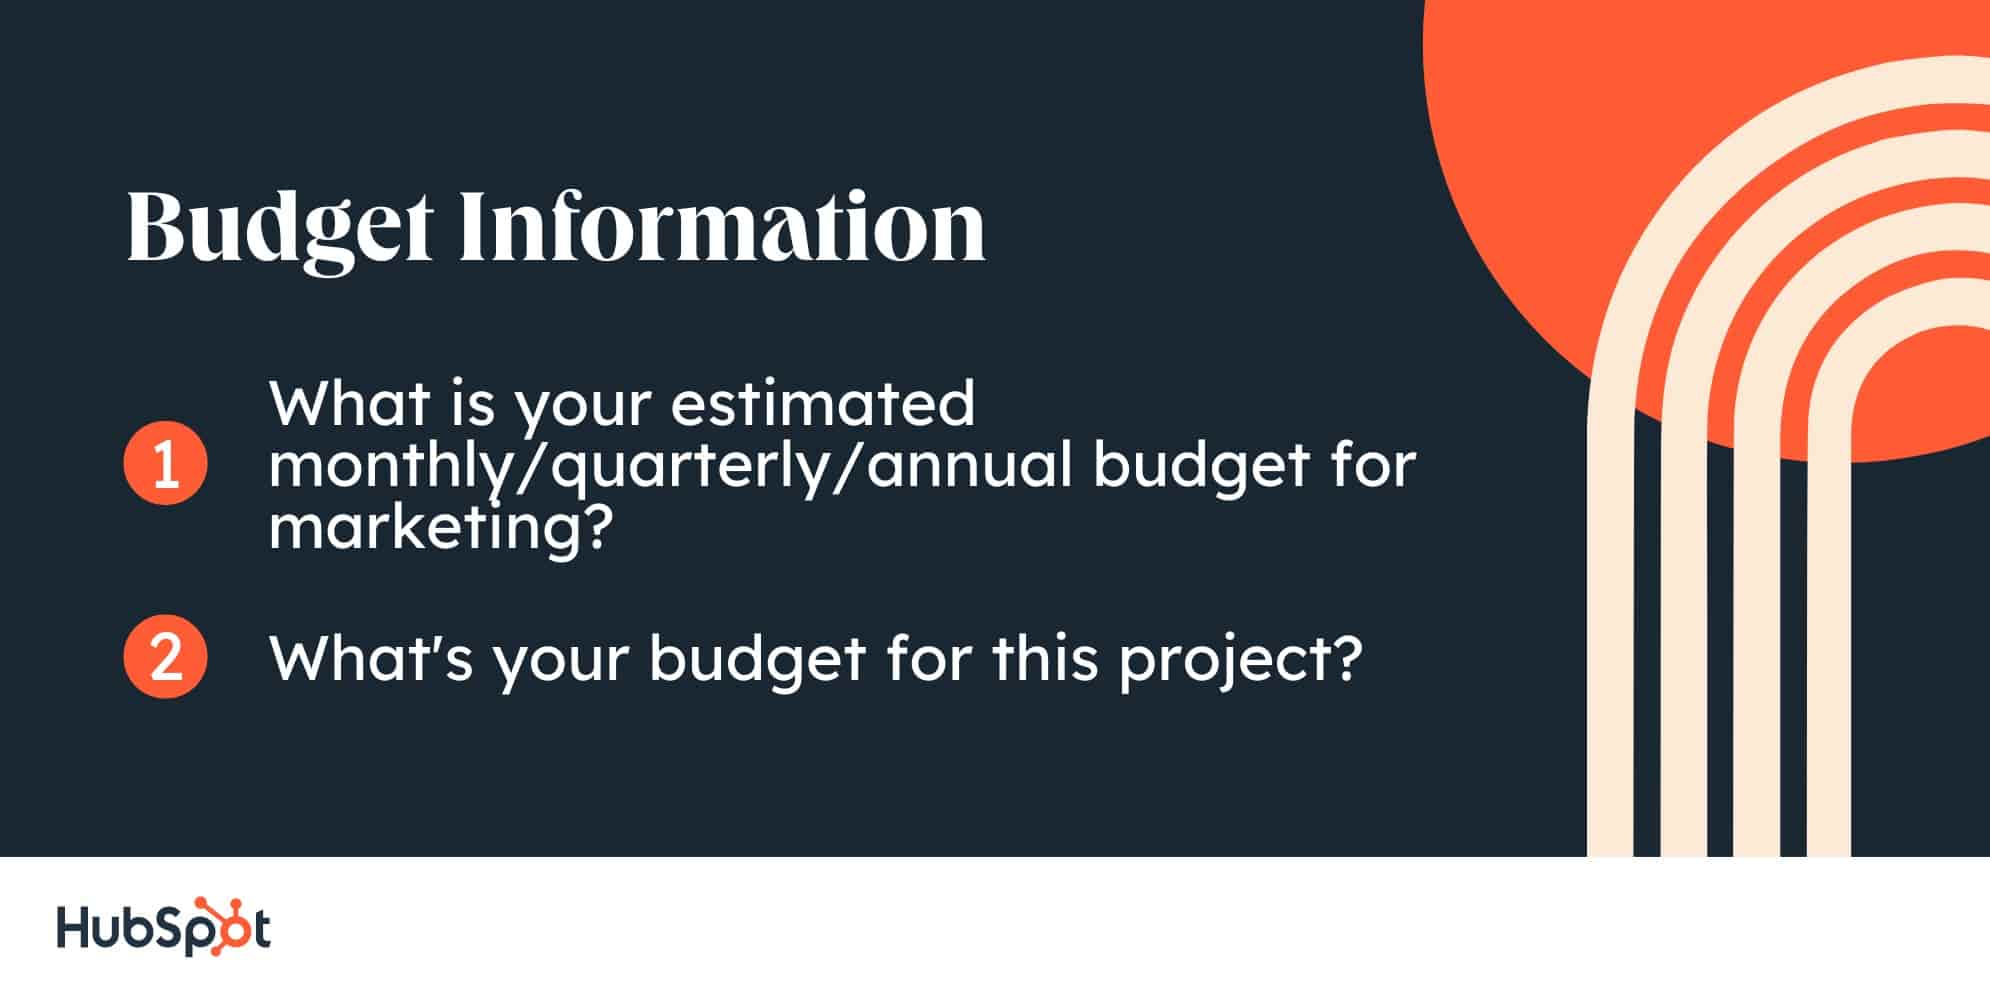 client intake form; Budget Information. What is your estimated monthly/quarterly/annual budget for marketing? What's your budget for this project?